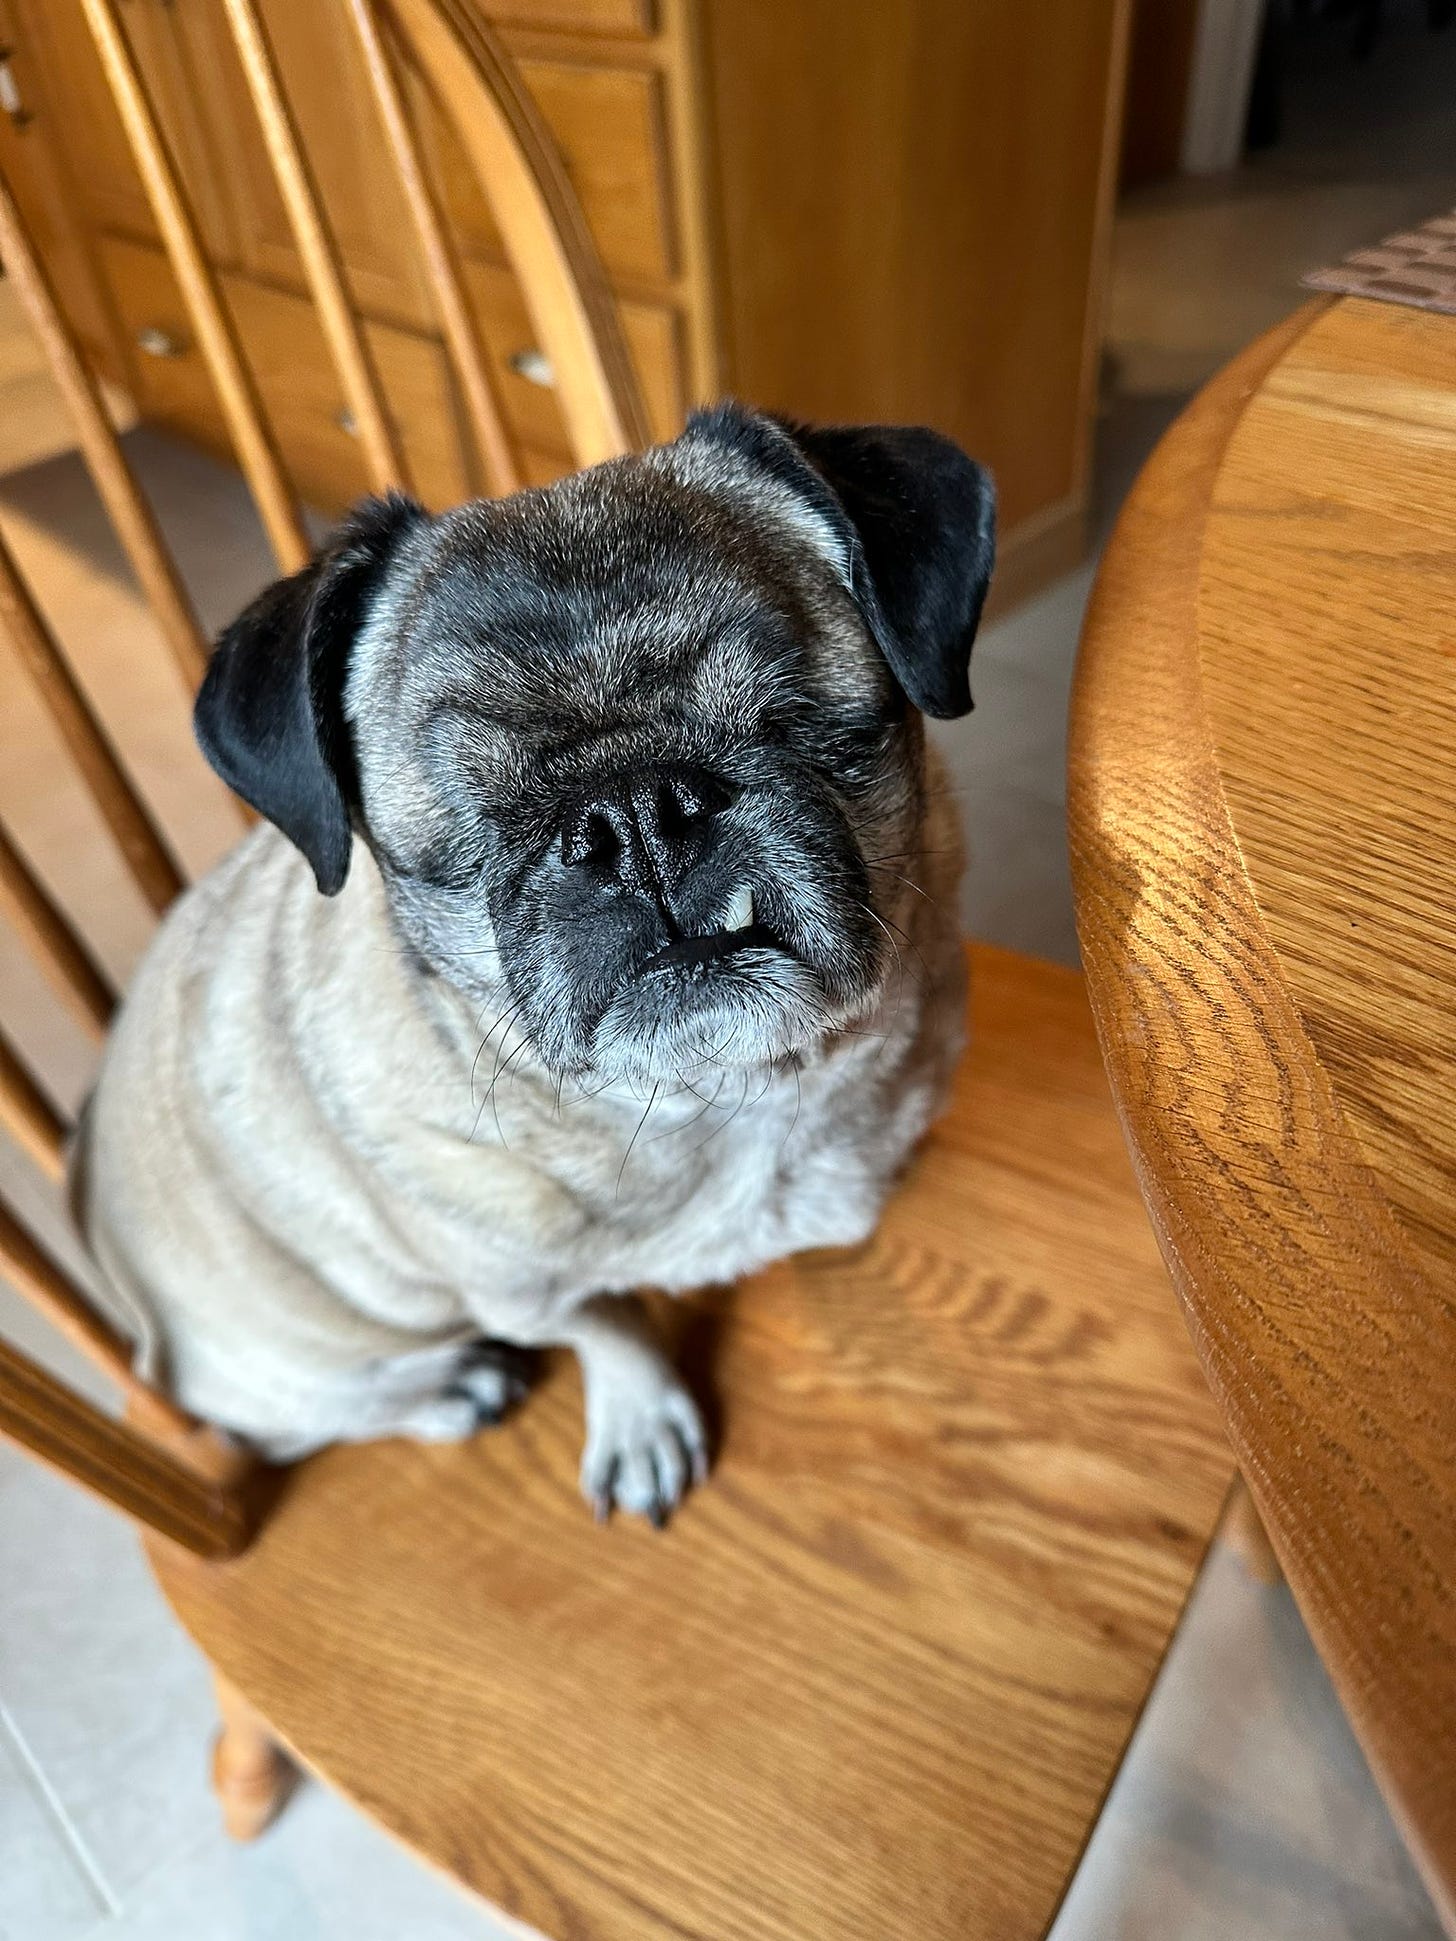 Photo of a charming little pug with no eyes sitting in a chair.